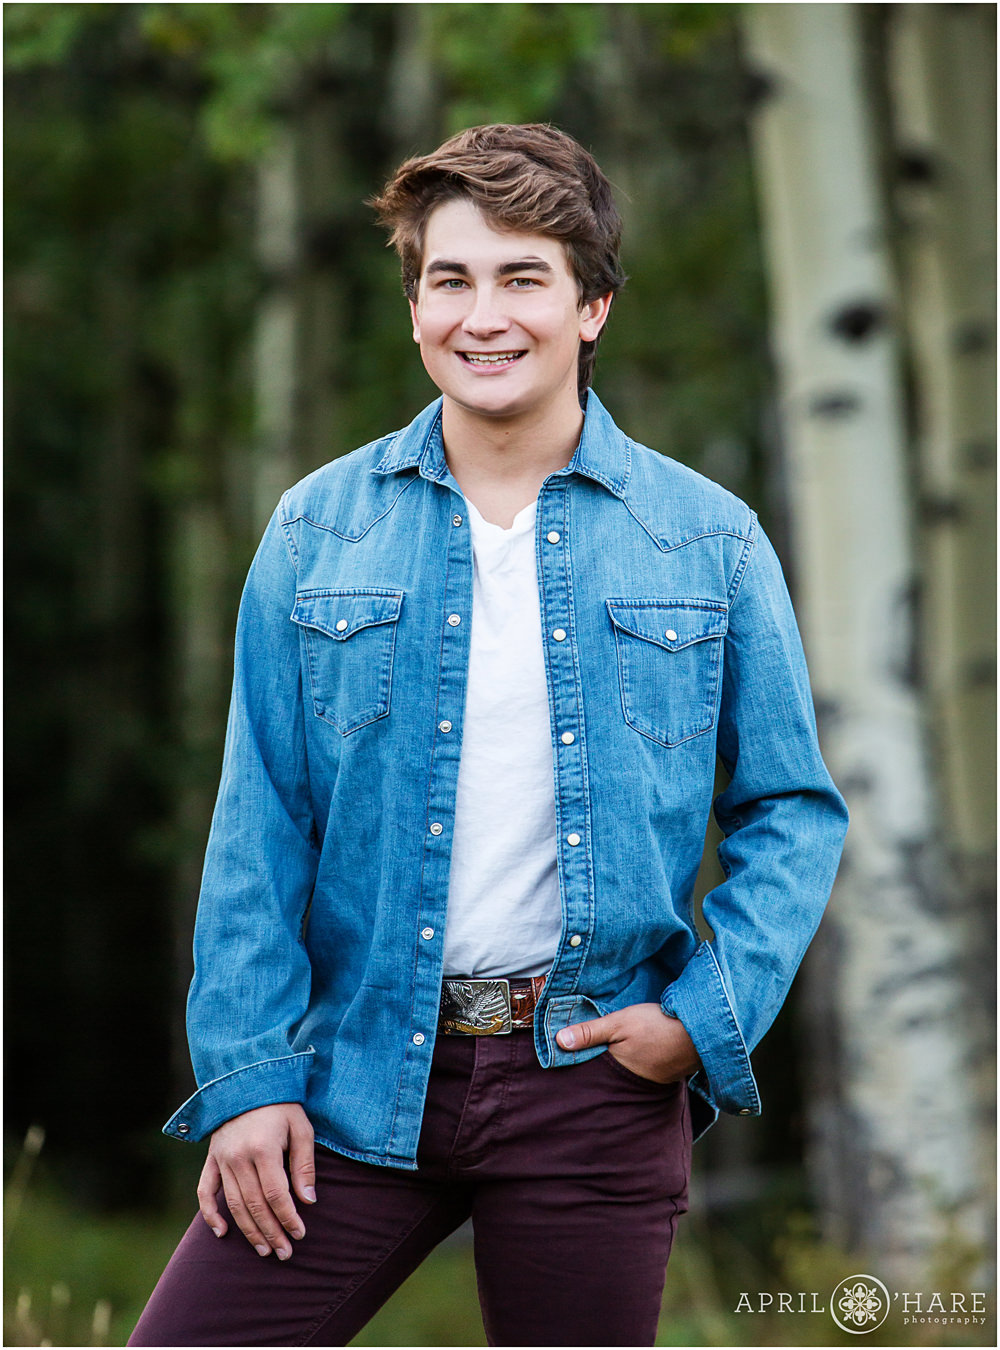 High school senior Boy wearing maroon pants, white tshirt, and Blue jean button up shirt poses in an Aspen Tree forest in Colorado